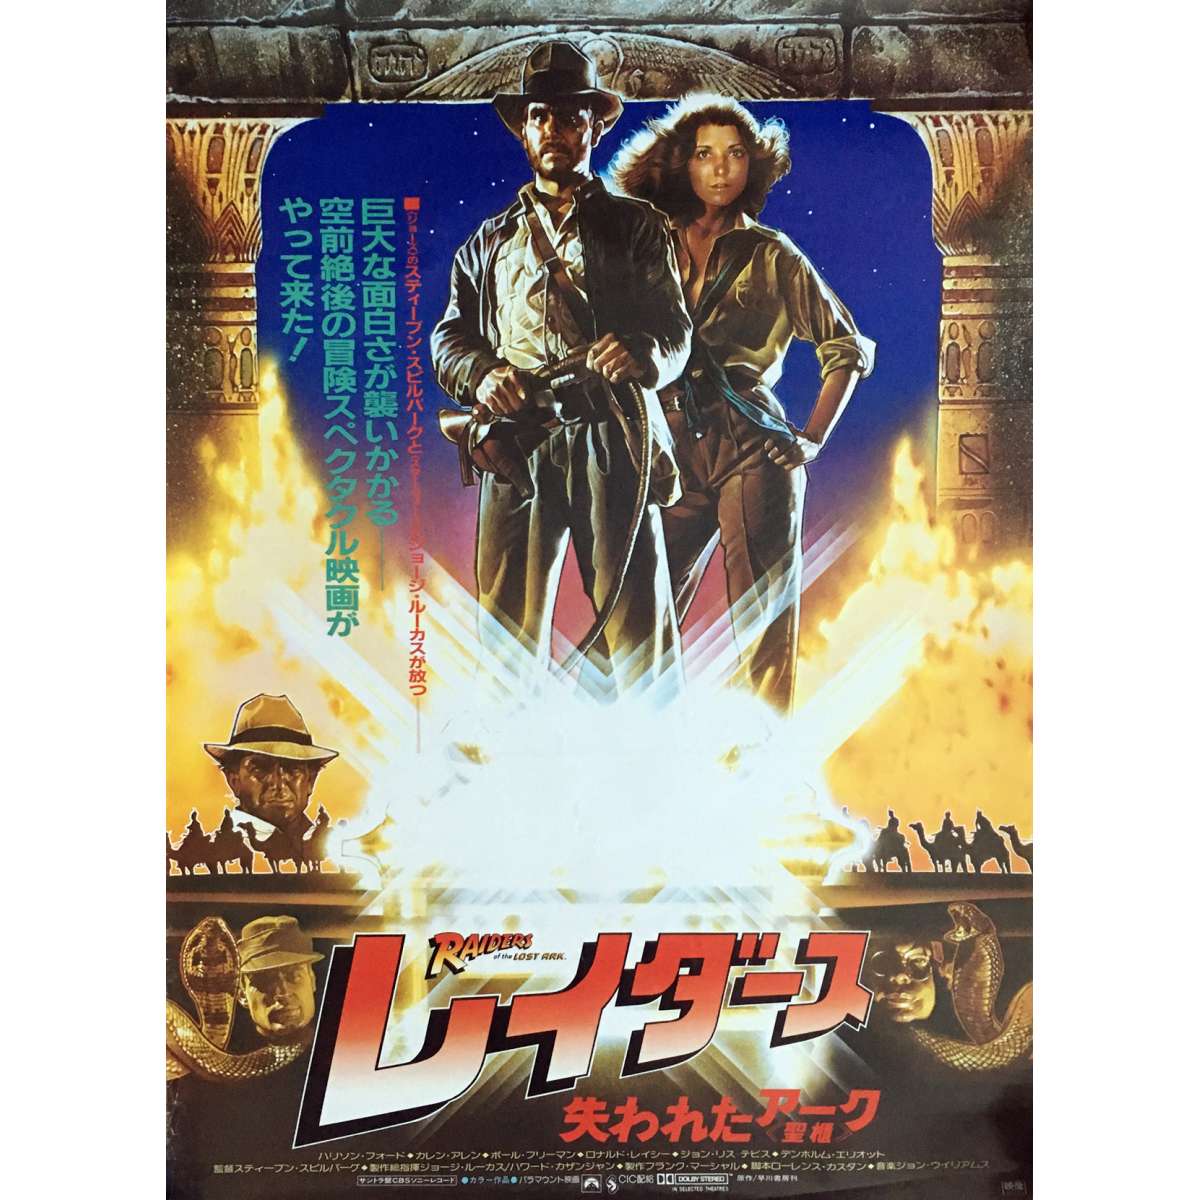 Indiana Jones - Vintage movie posters and stills for sale